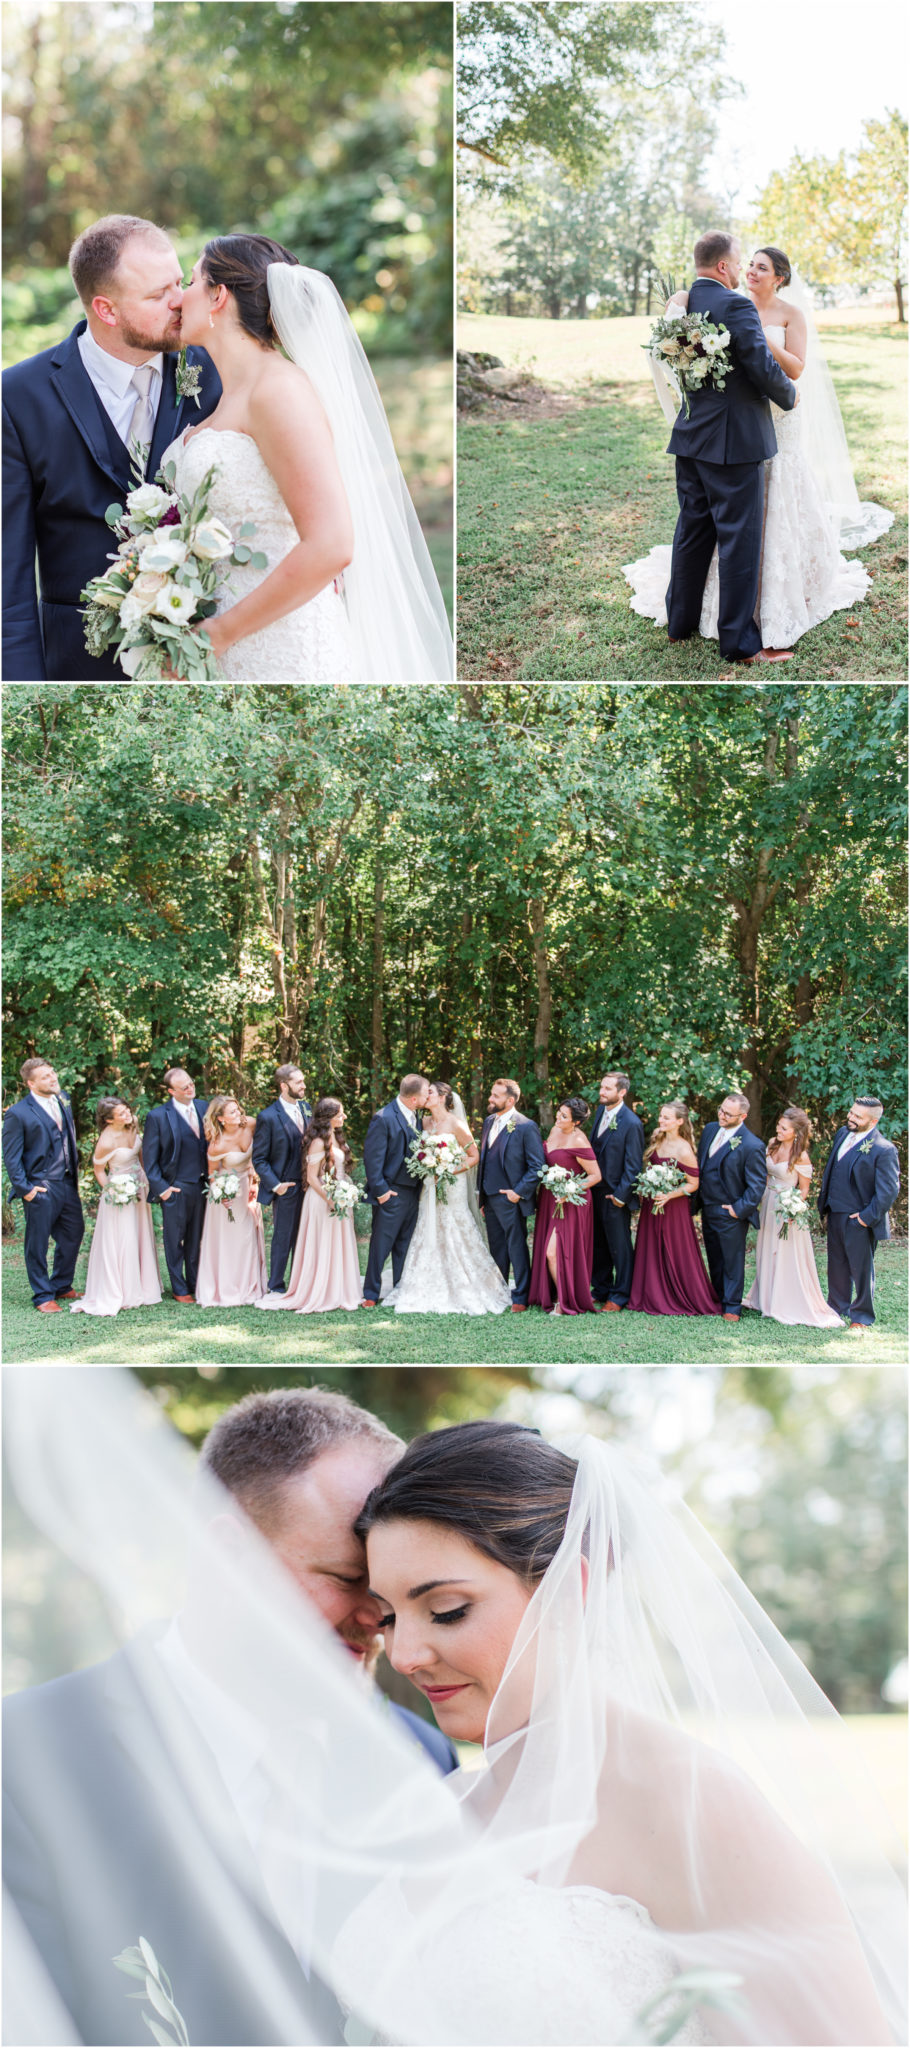 A Vineyard Wedding at Cityscape Winery in Pelzer, SC